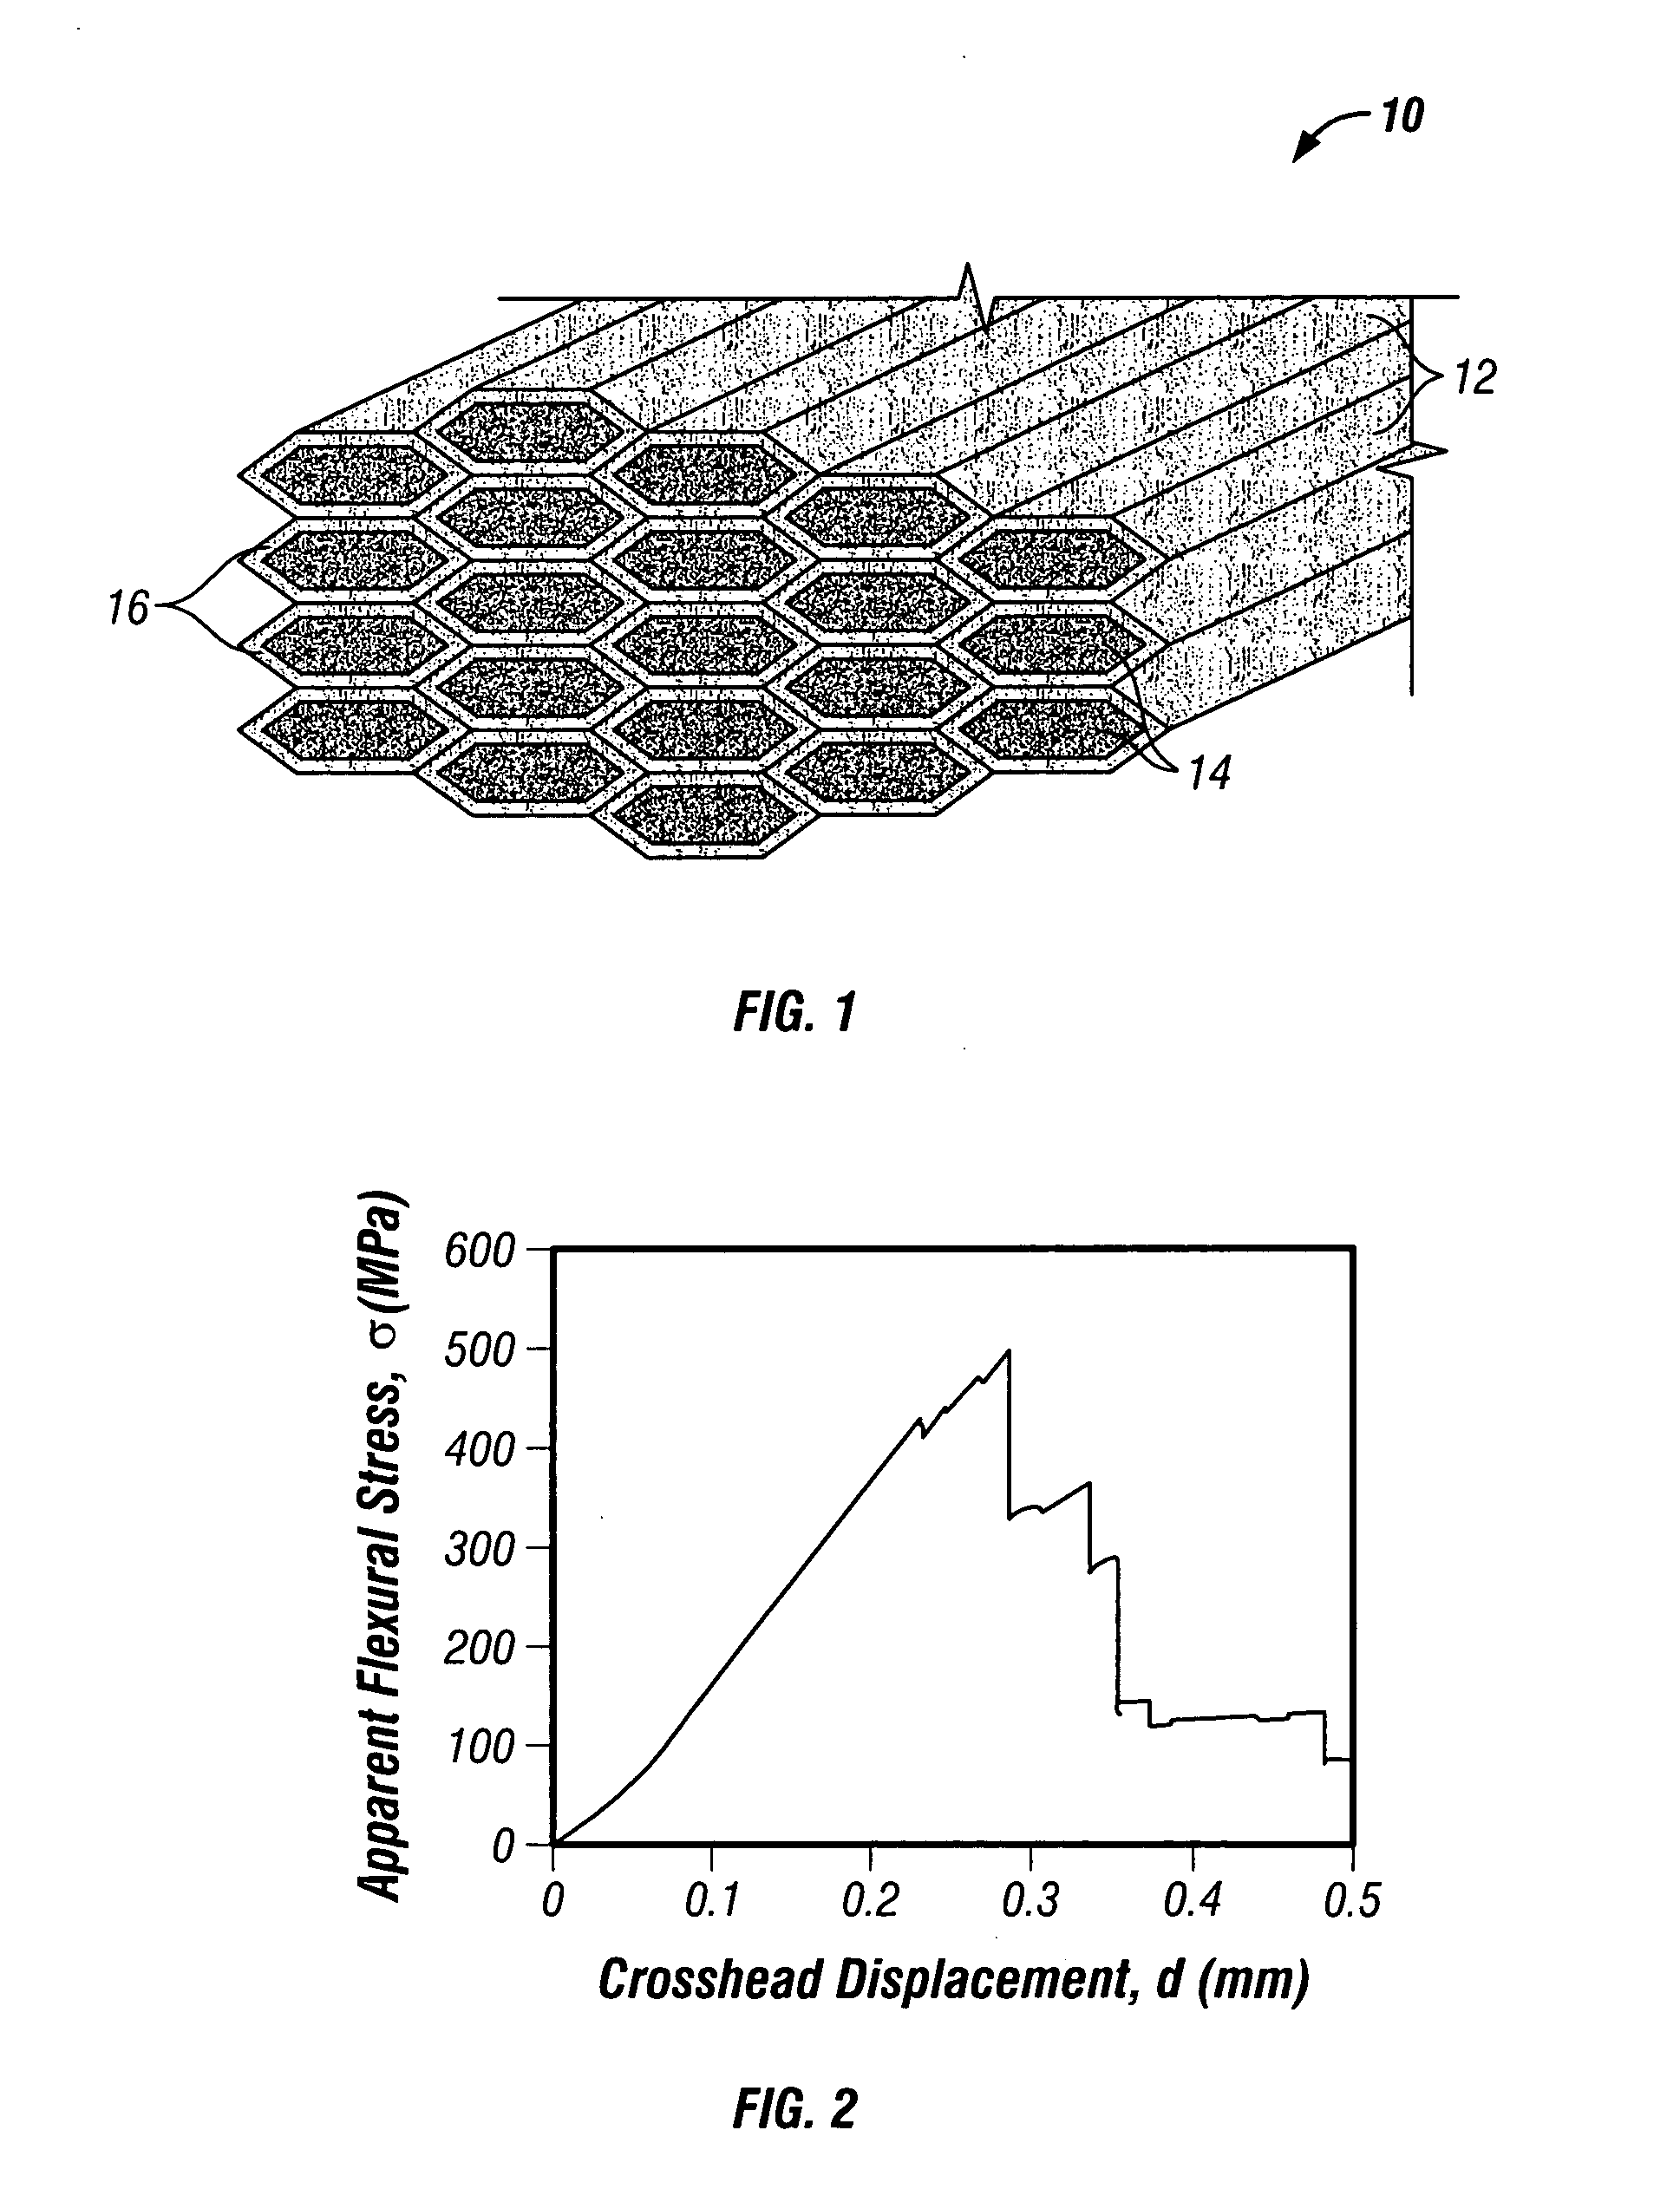 Multi-functional composite structures